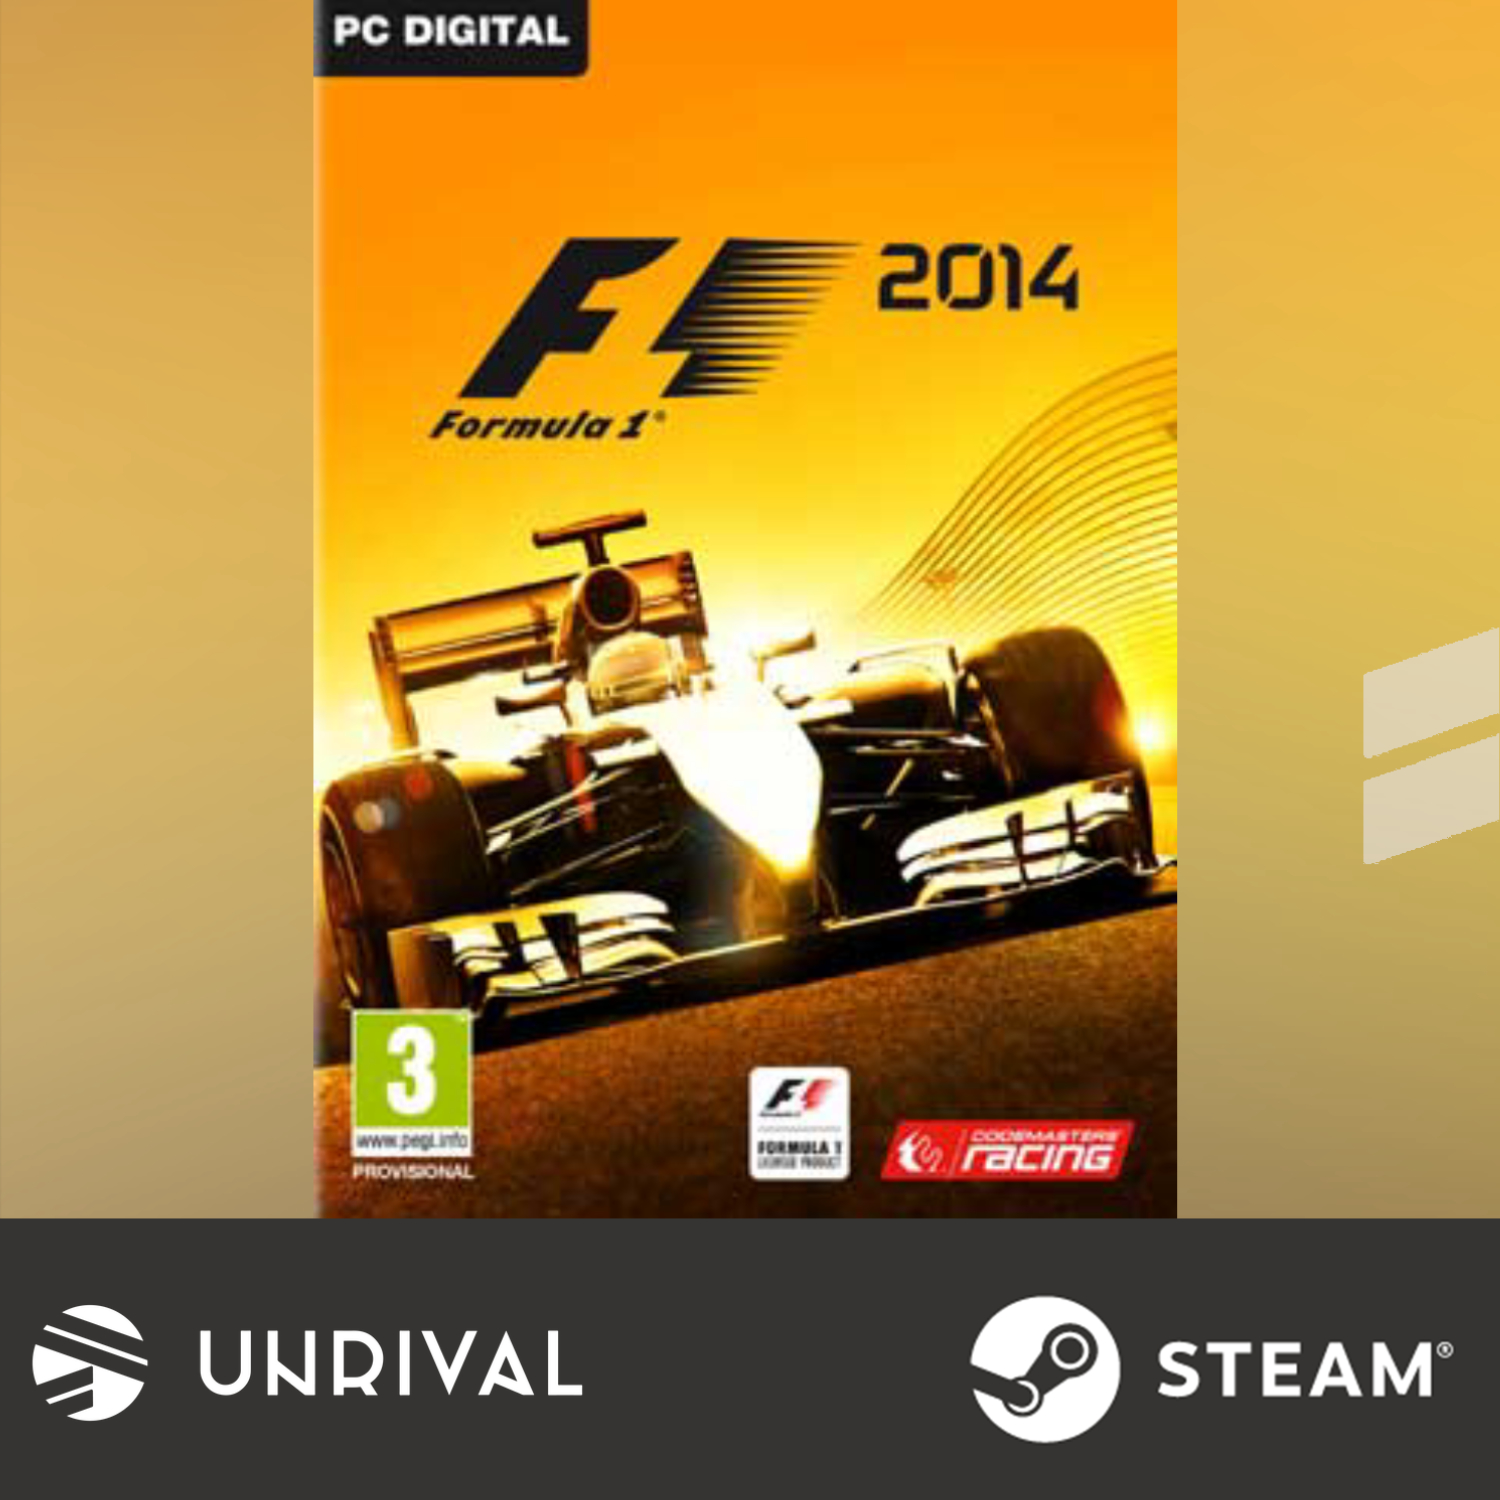 F1 2014 PC Digital Download Game (Multiplayer) - Unrival